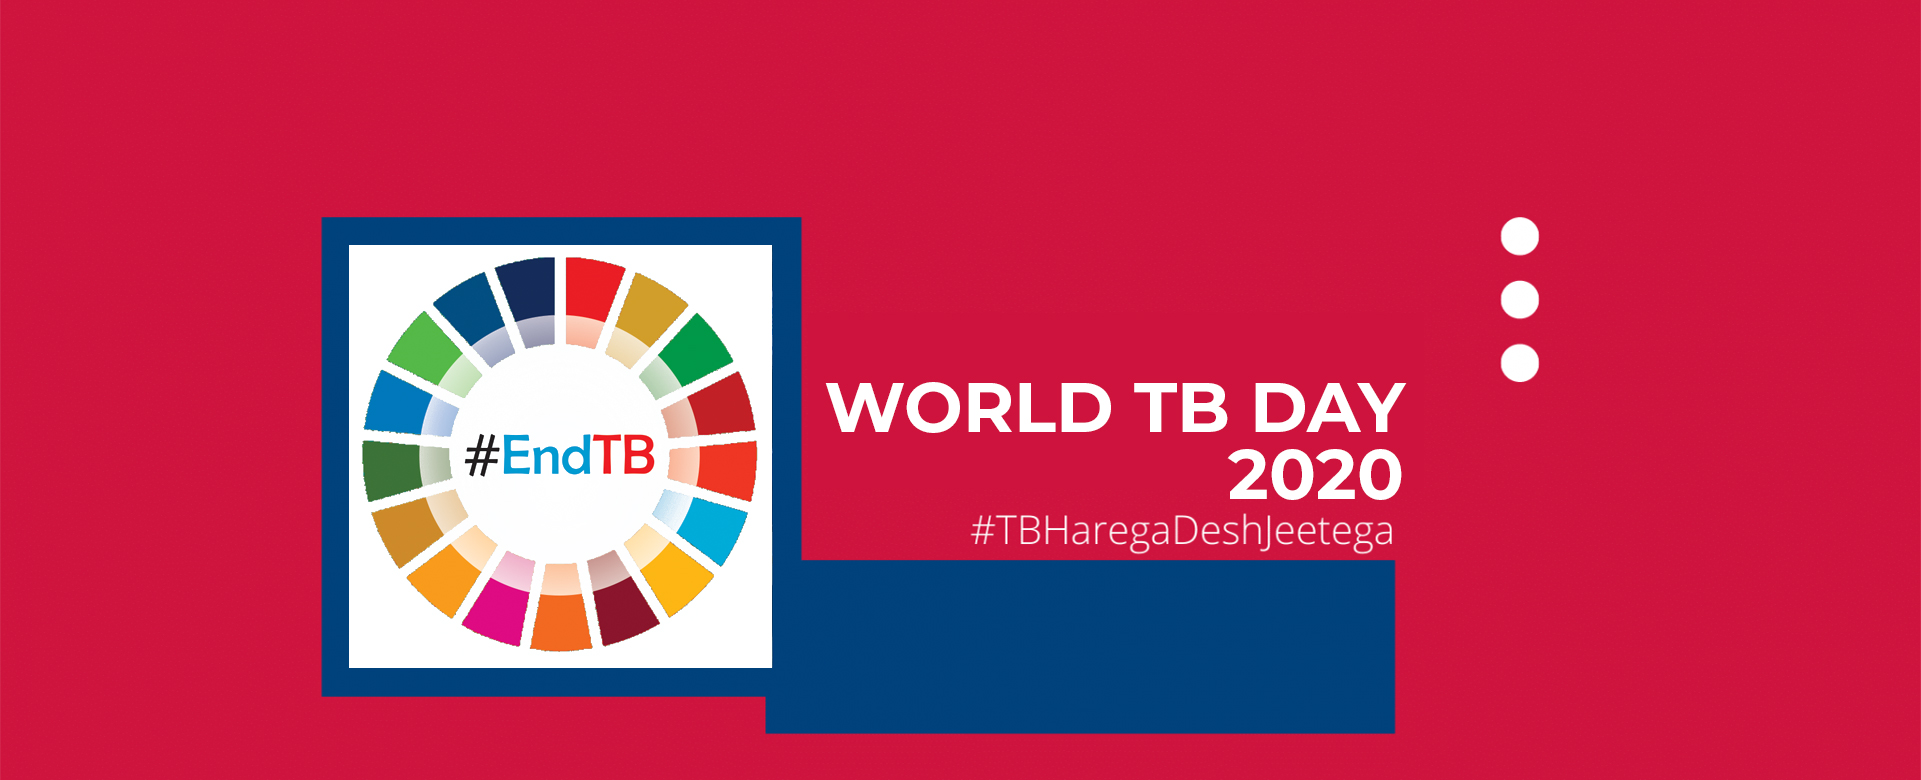 World TB Day 2020- Corporates join the fight to end TB by 2025